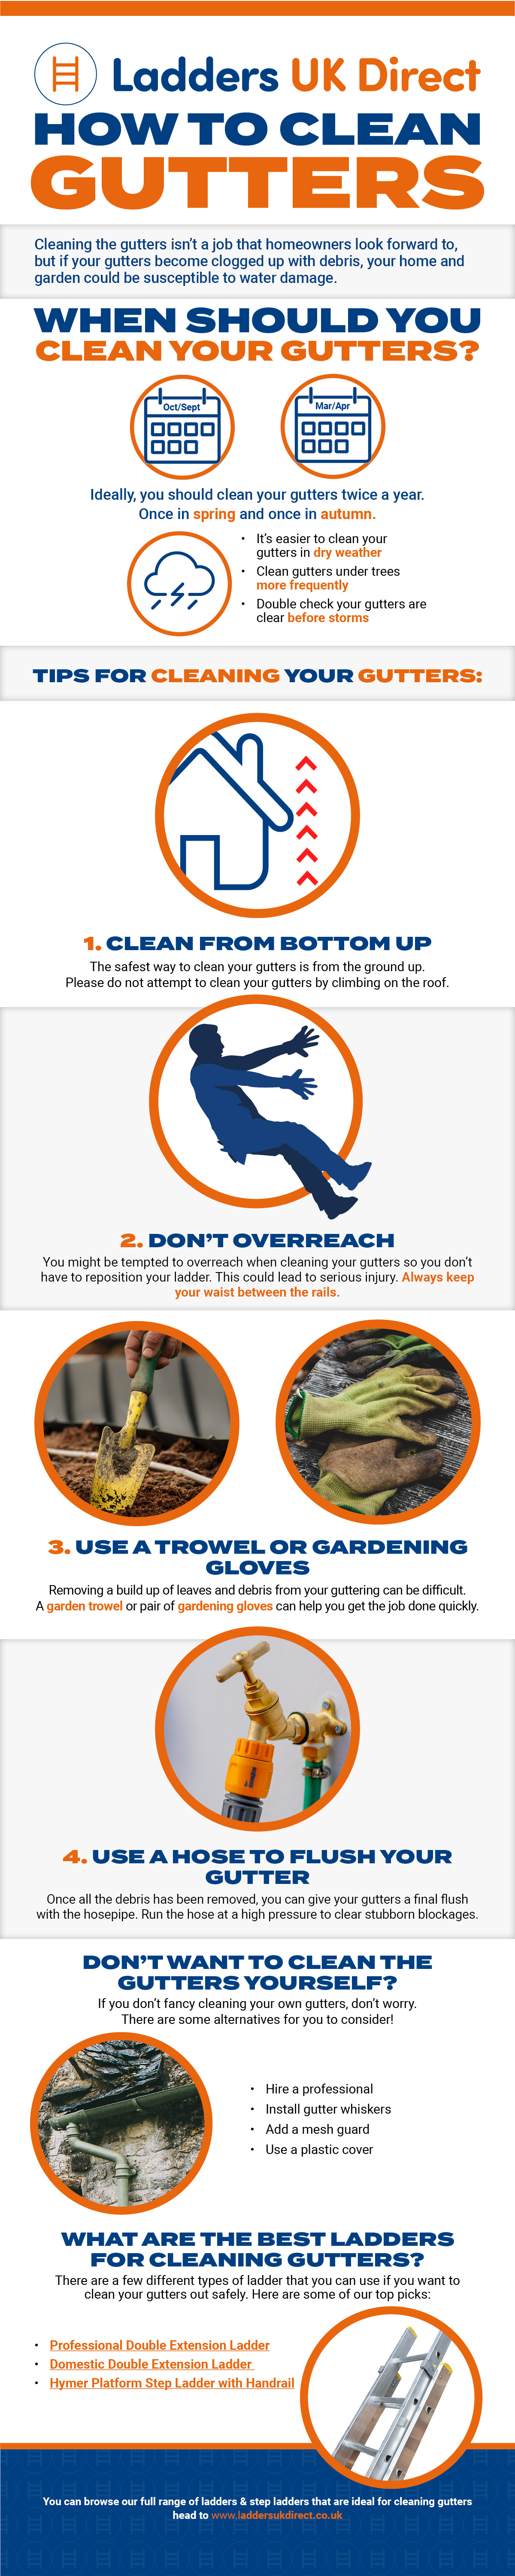 How to clean gutters infographic - transcribed below